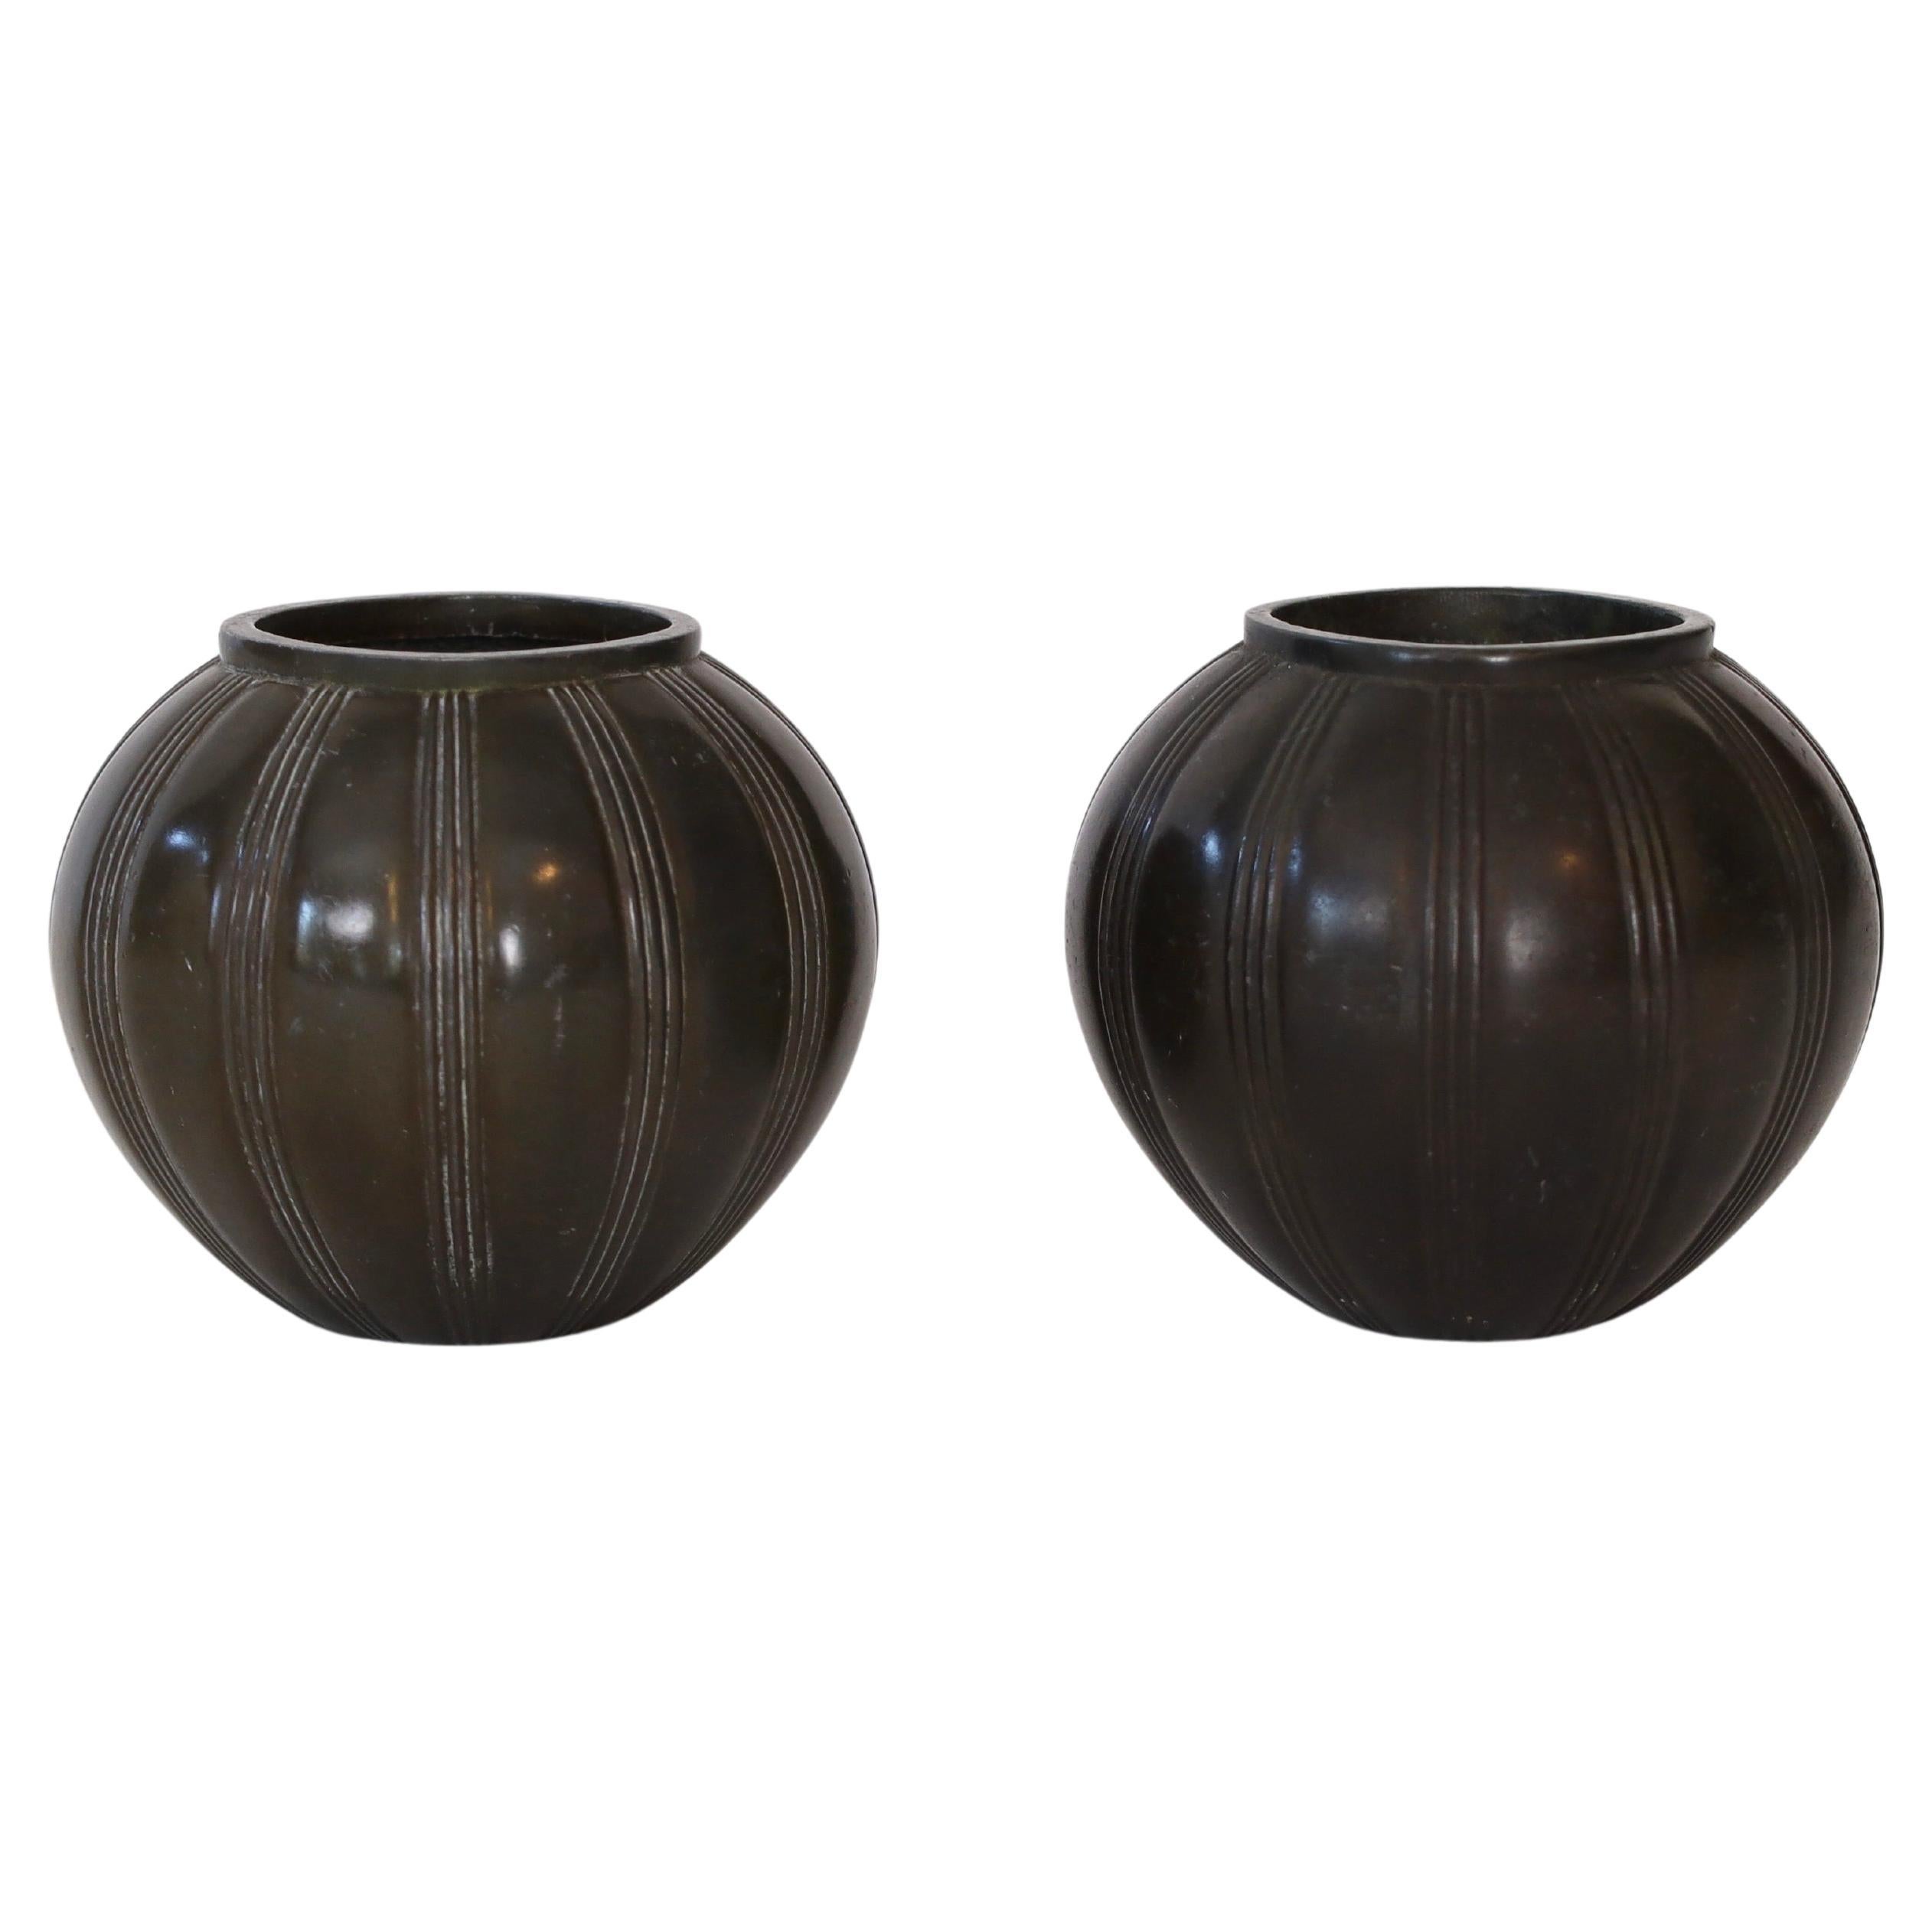 Pair of Round Art Deco Vases by Just Andersen, 1930s, Denmark For Sale